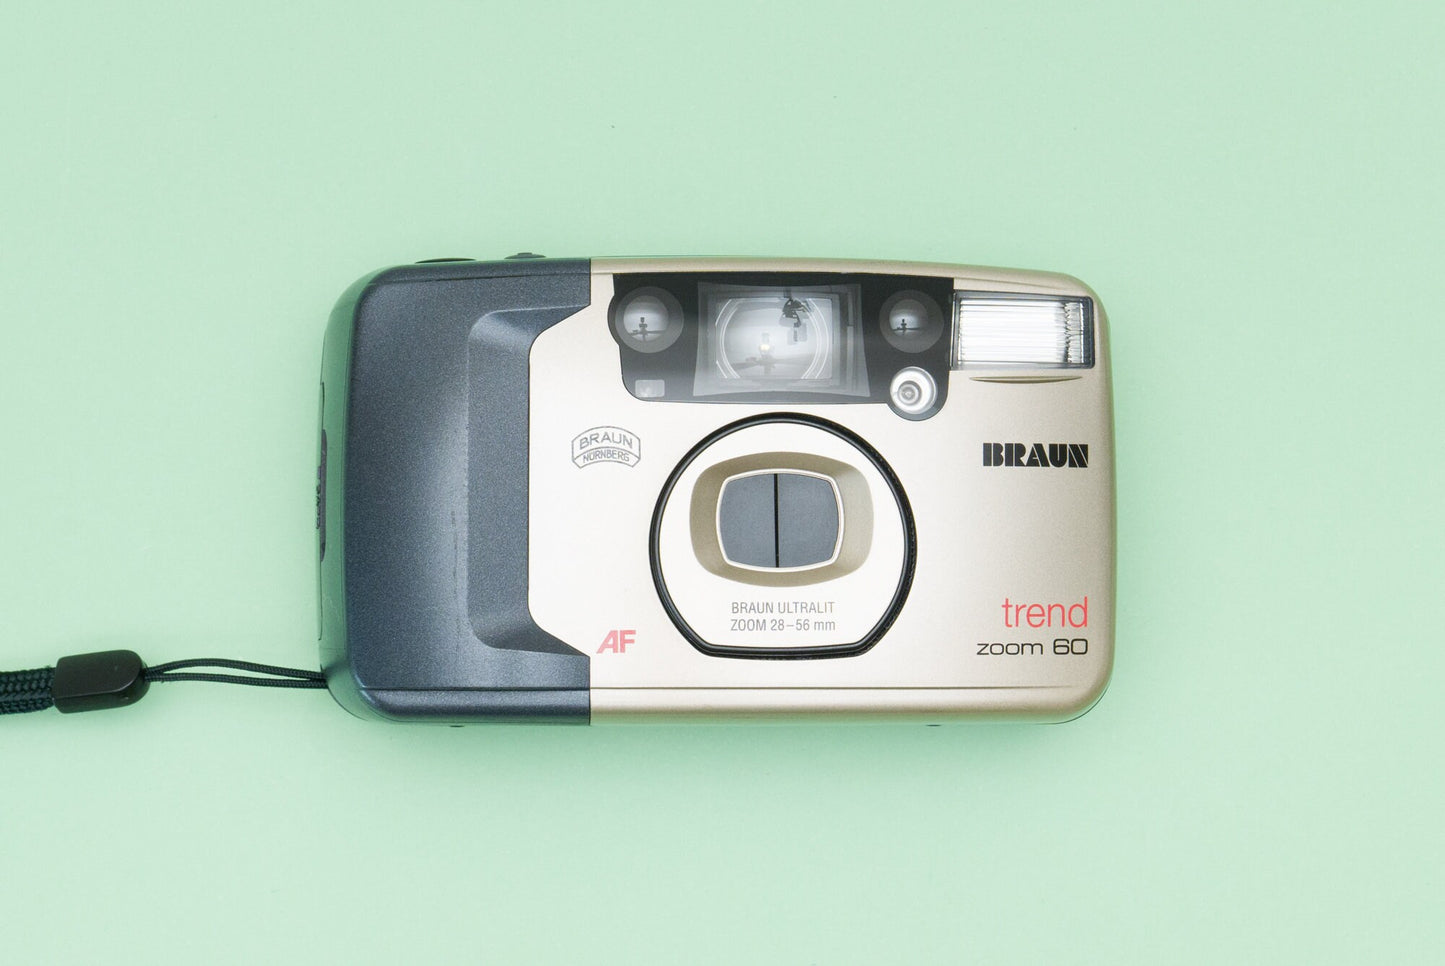 BRAUN Trend Zoom 60 Compact 35mm Point and Shoot Film Camera